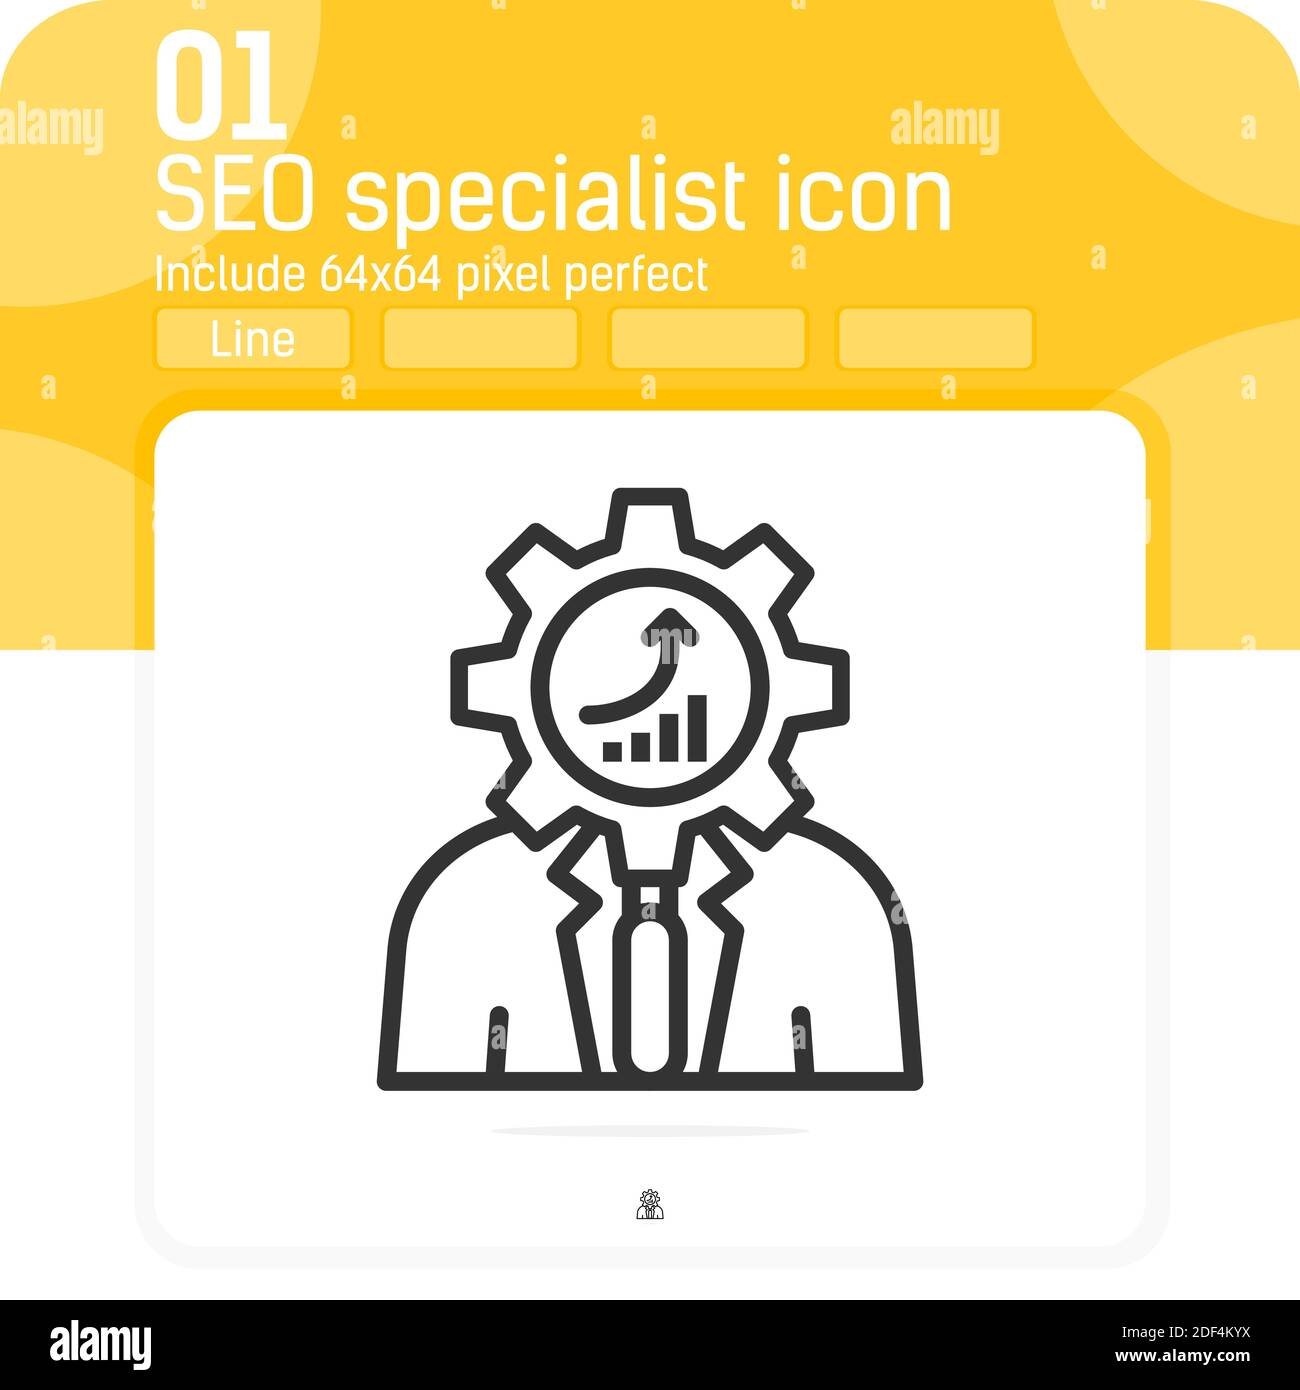 seo specialist icon with outline style isolated on white background. Vector illustration seo specialist sign symbol icon concept for web design Stock Vector